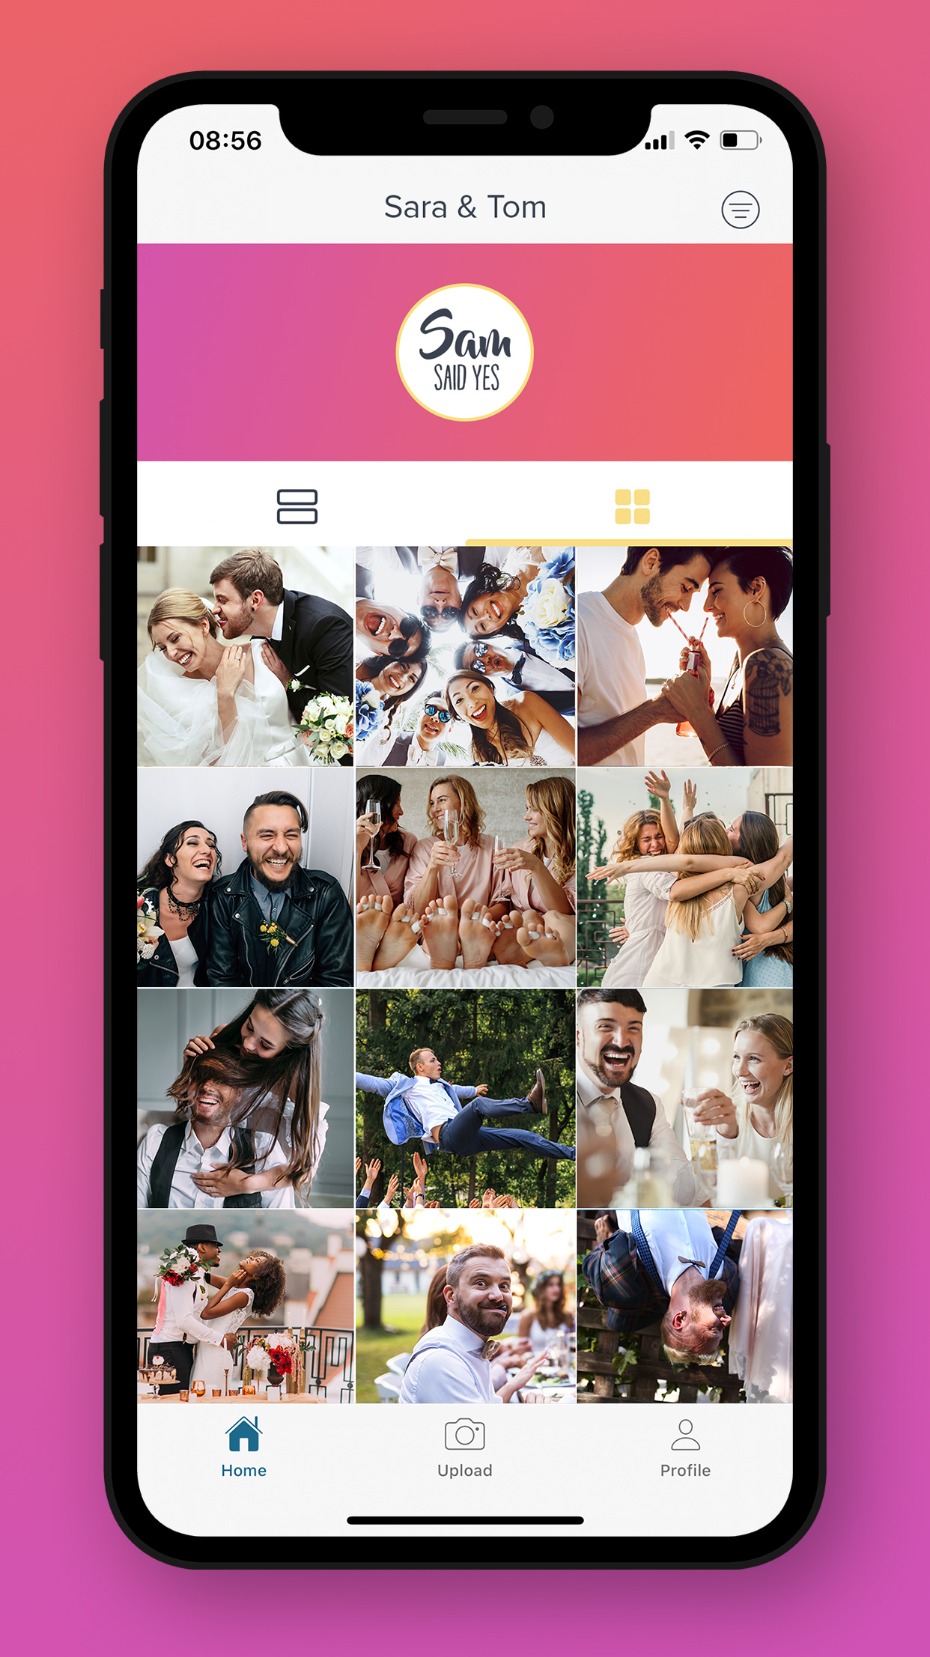 This App Lets You Know Exactly How Much Fun Your Guests Are Having at Your Wedding